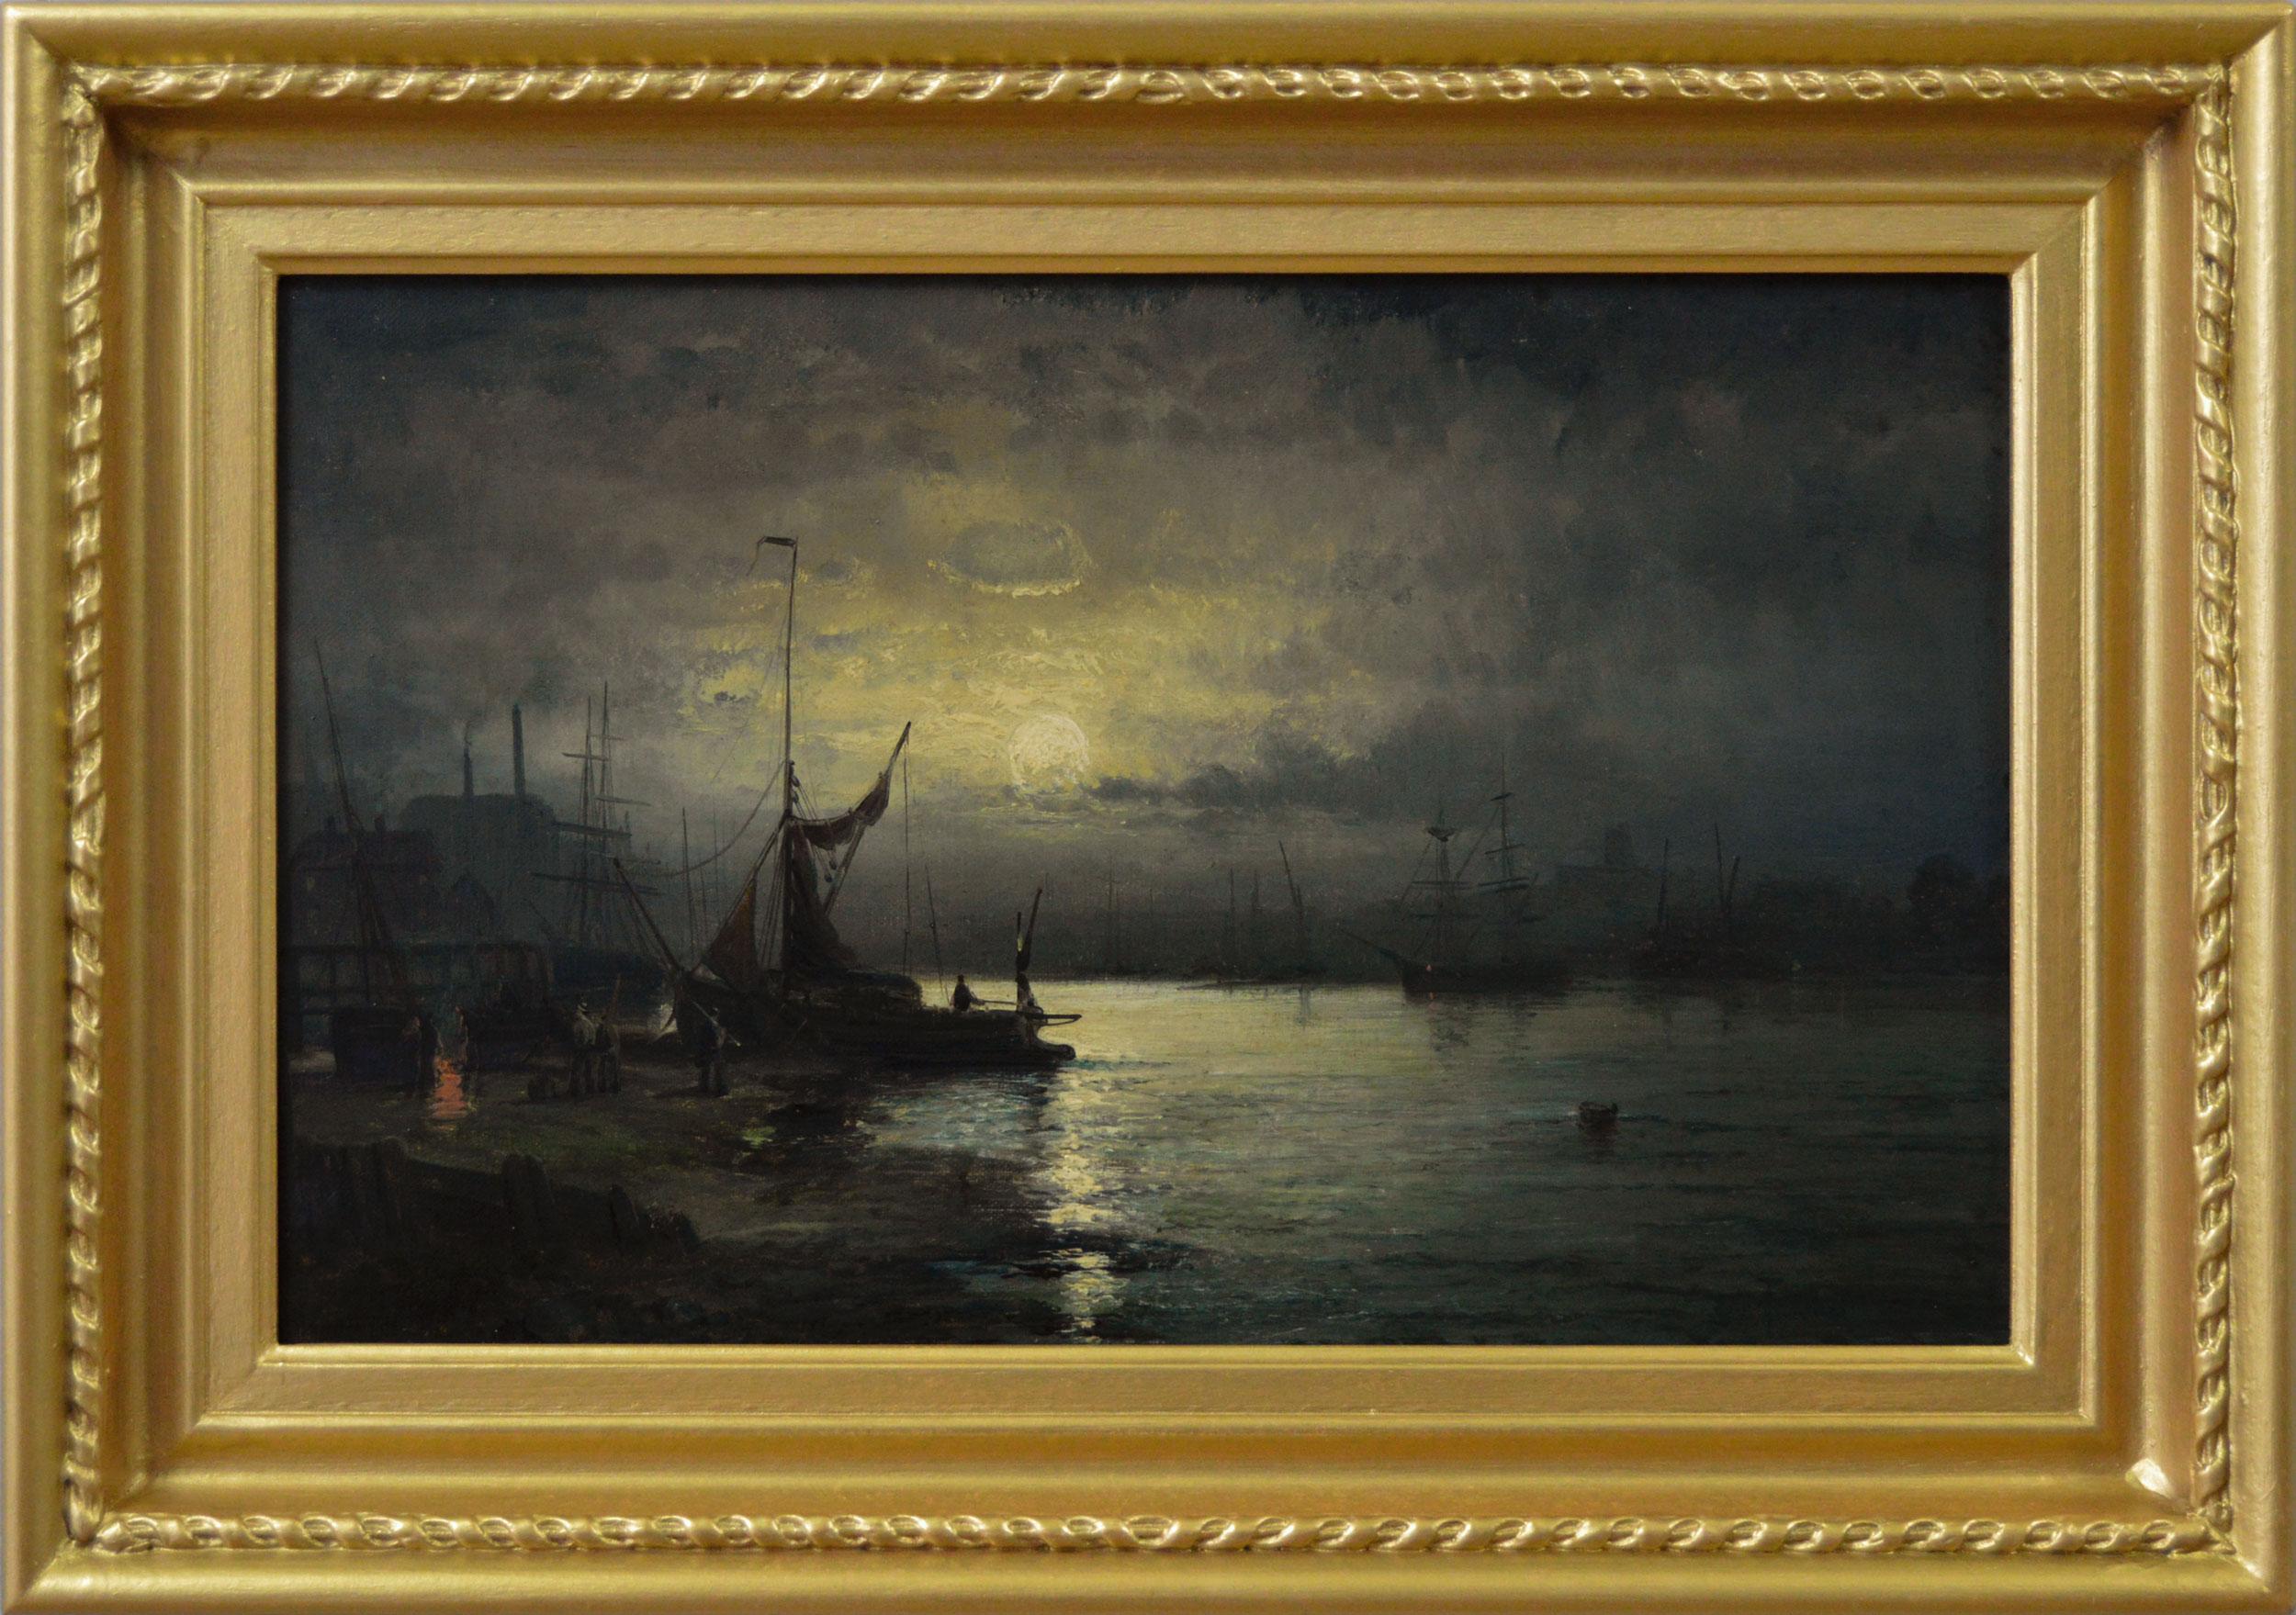 Hubert Thornley Landscape Painting - 19th Century seascape oil painting of shipping by moonlight on the Medway